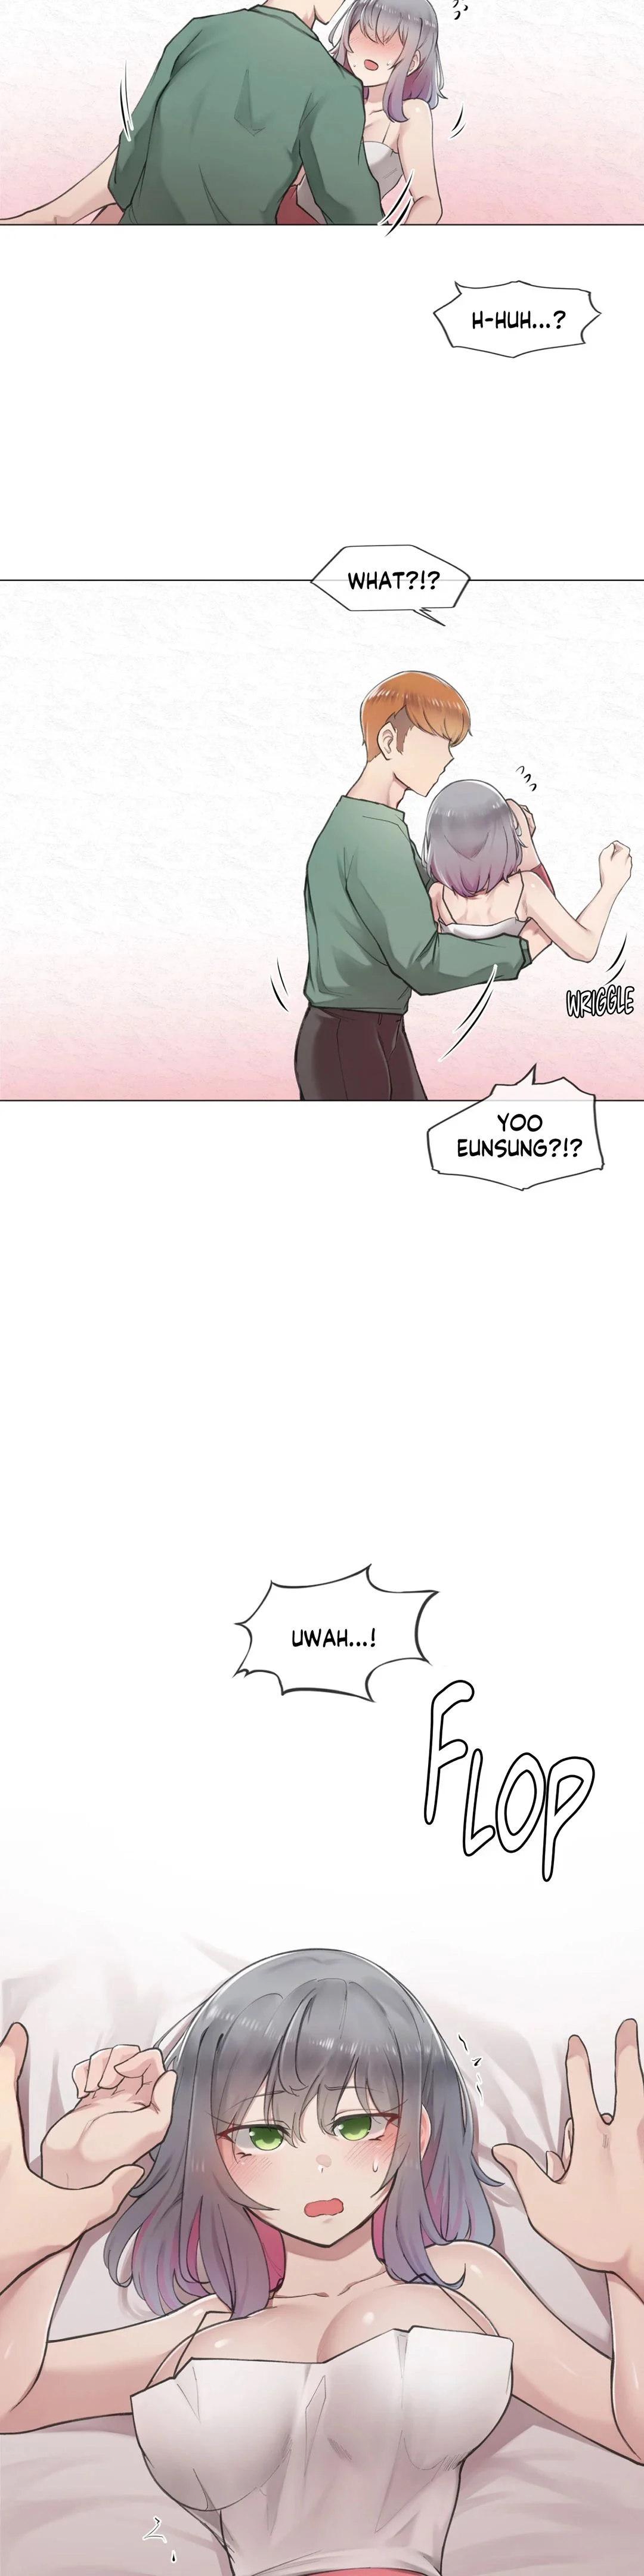 [Dumangoon, KONG_] Sexcape Room: Snap Off Ch.7/7 [English] [Manhwa PDF] Completed 22